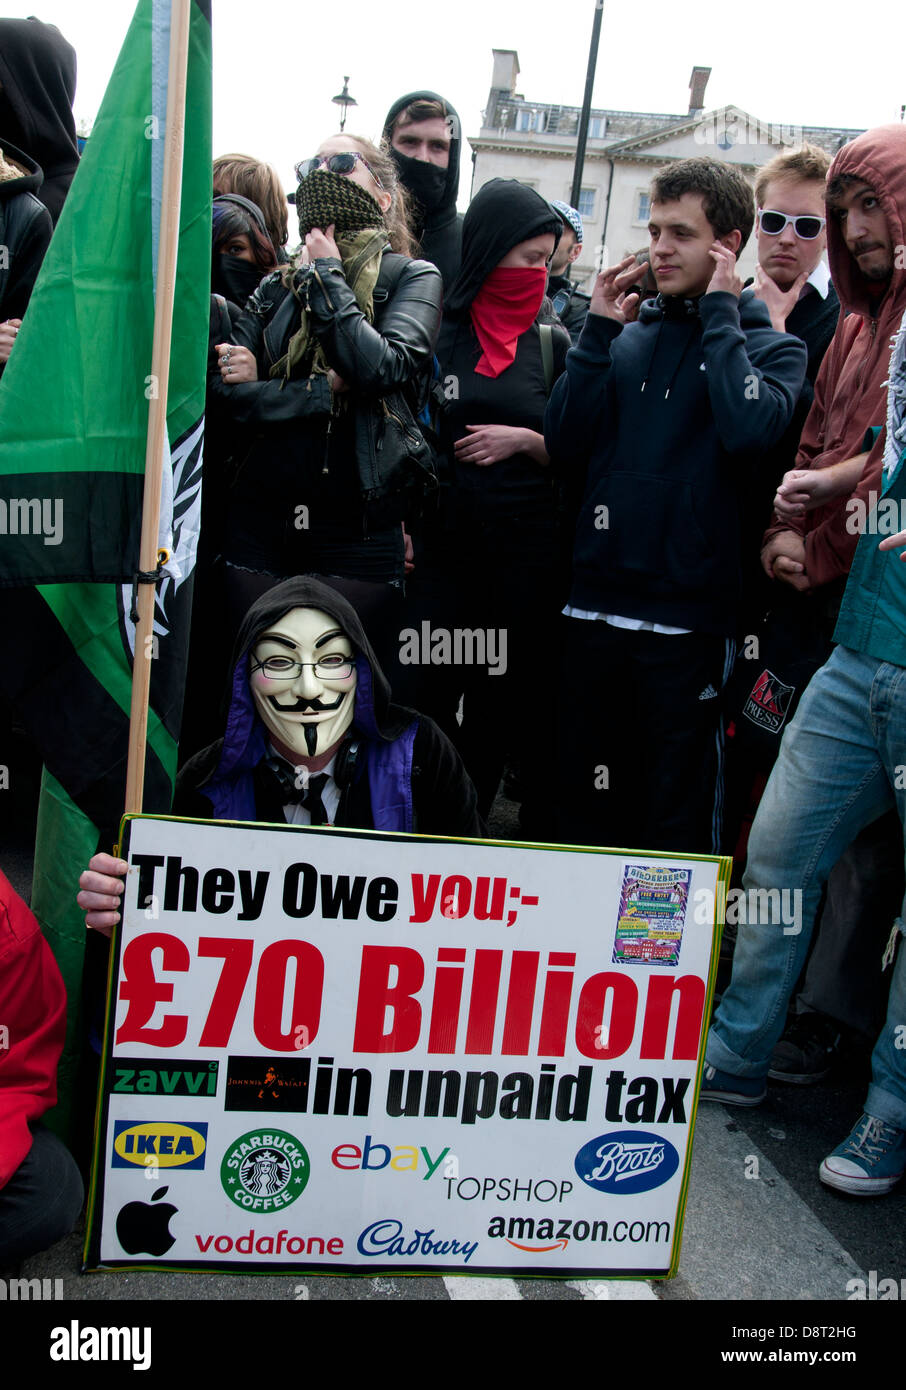 Anonymous and others protesting against unpaid taxes by large companies Stock Photo